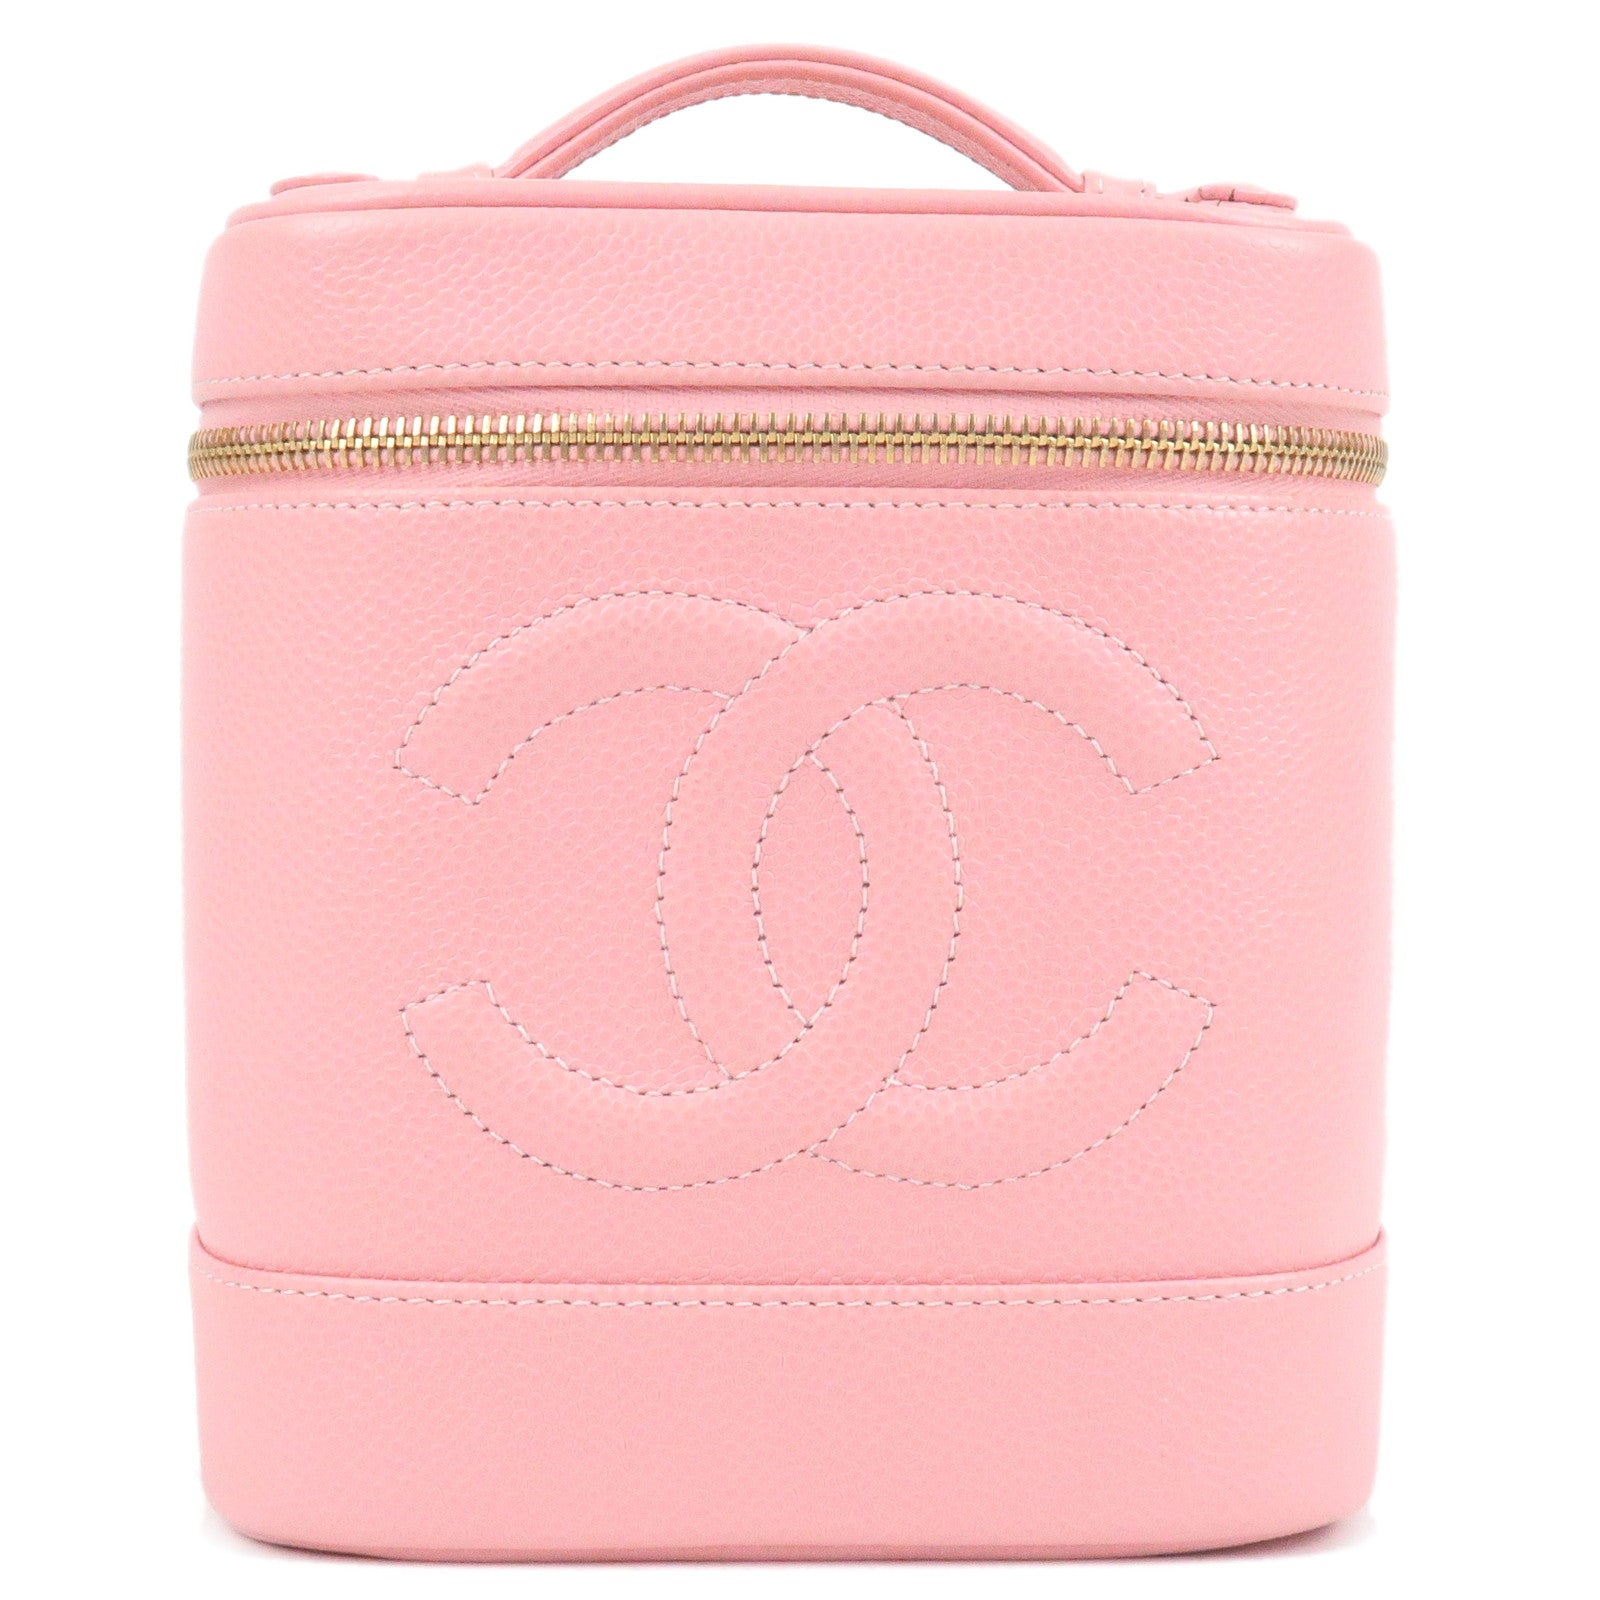 CHANEL-Caviar-Skin-Vanity-Bag-Hand-Bag-Cosmetic-Pouch-Pink-A01998